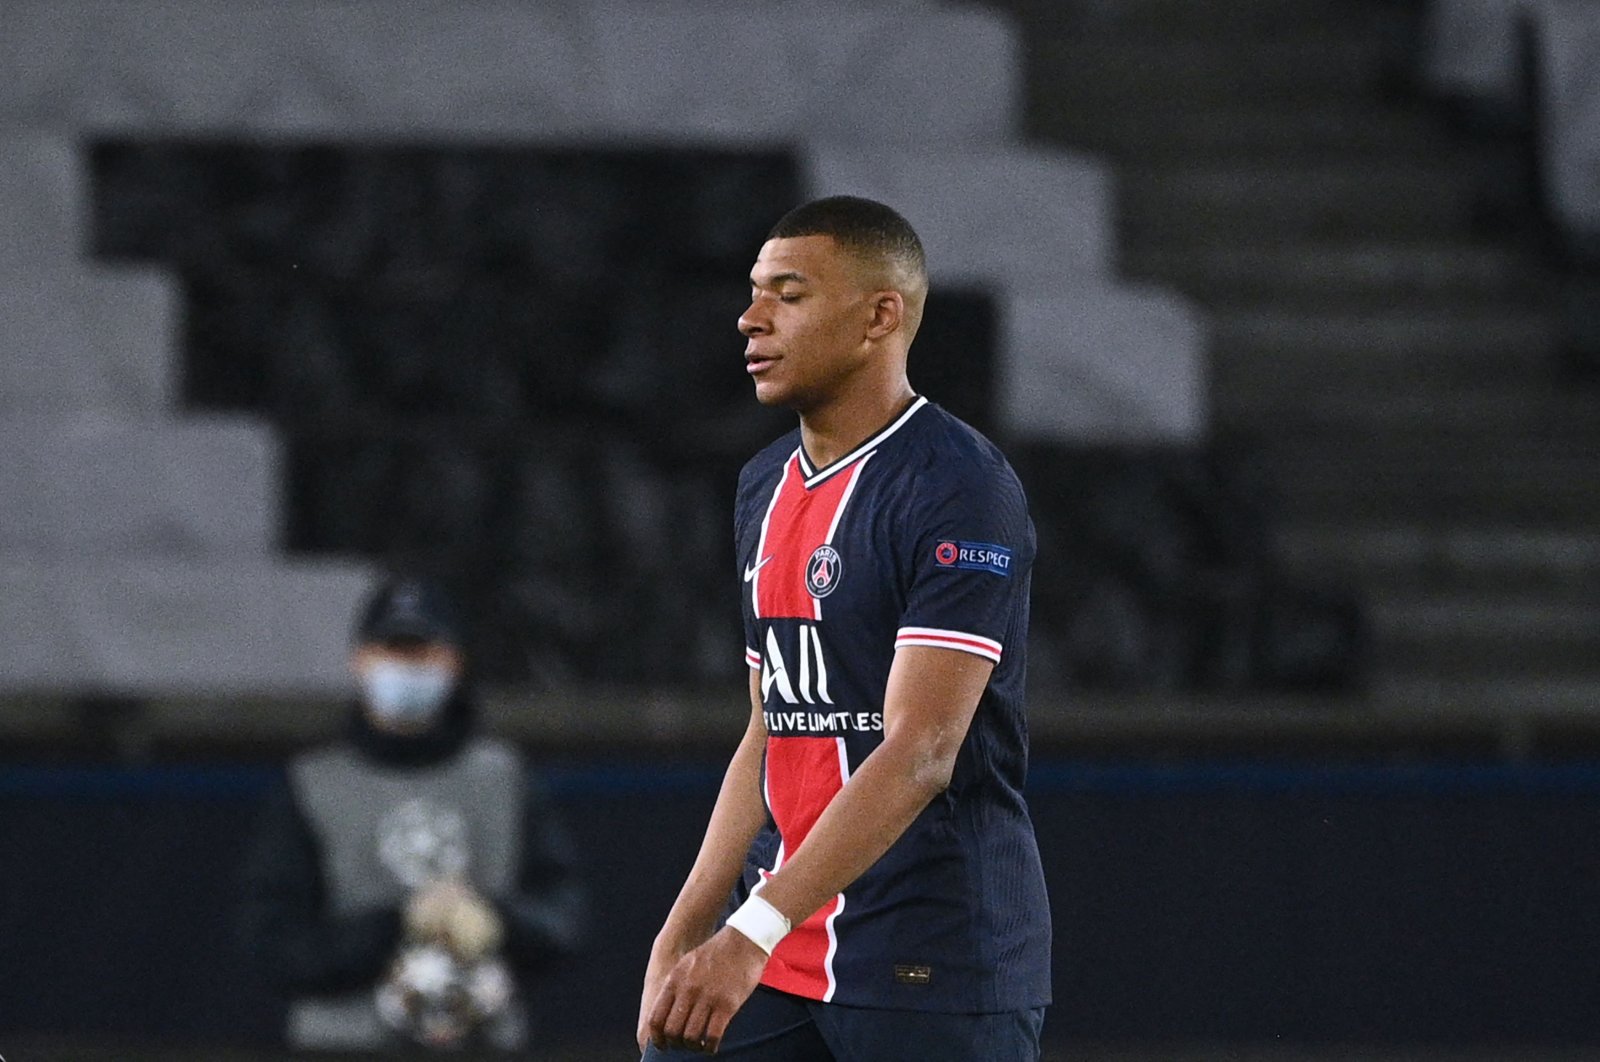 Paris Saint-Germain's French forward Kylian Mbappe reacts after losing the UEFA Champions League first-leg semifinal football match between PSG and Manchester City at the Parc des Princes stadium in Paris, France, April 28, 2021. (AFP Photo)